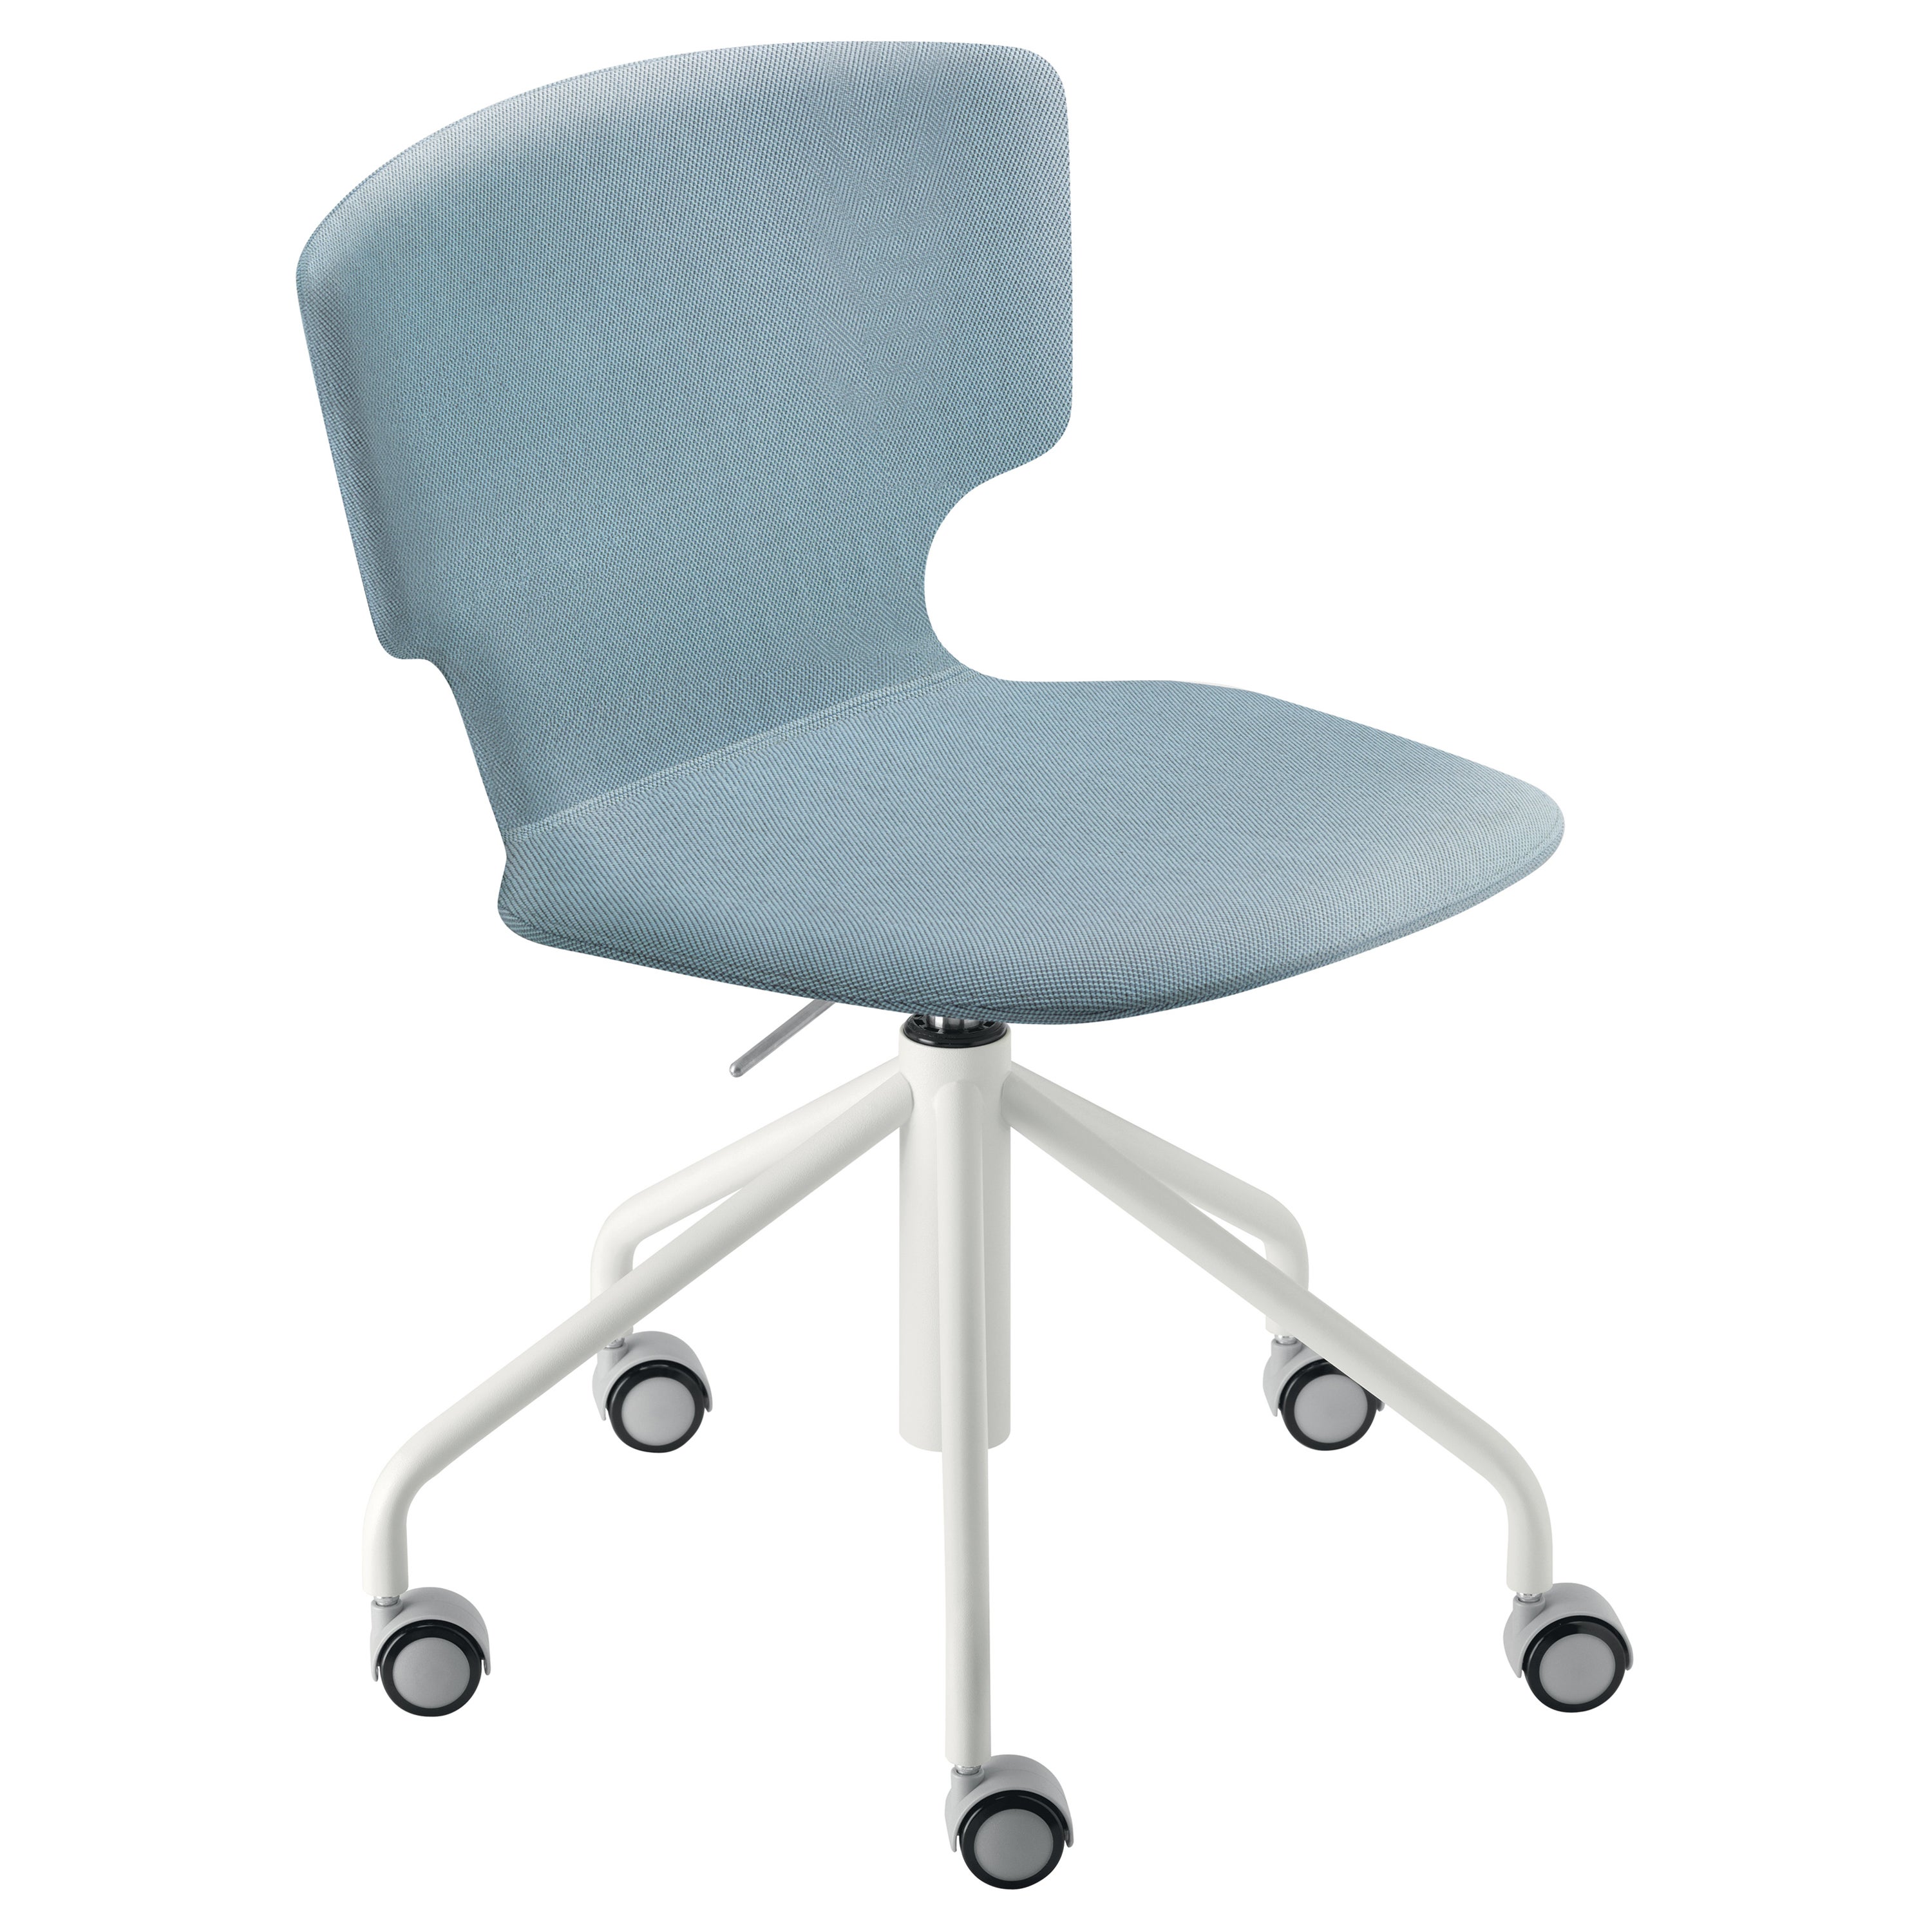 Alias 52C Enna Studio Chair in Upholstery with White Steel Frame For Sale